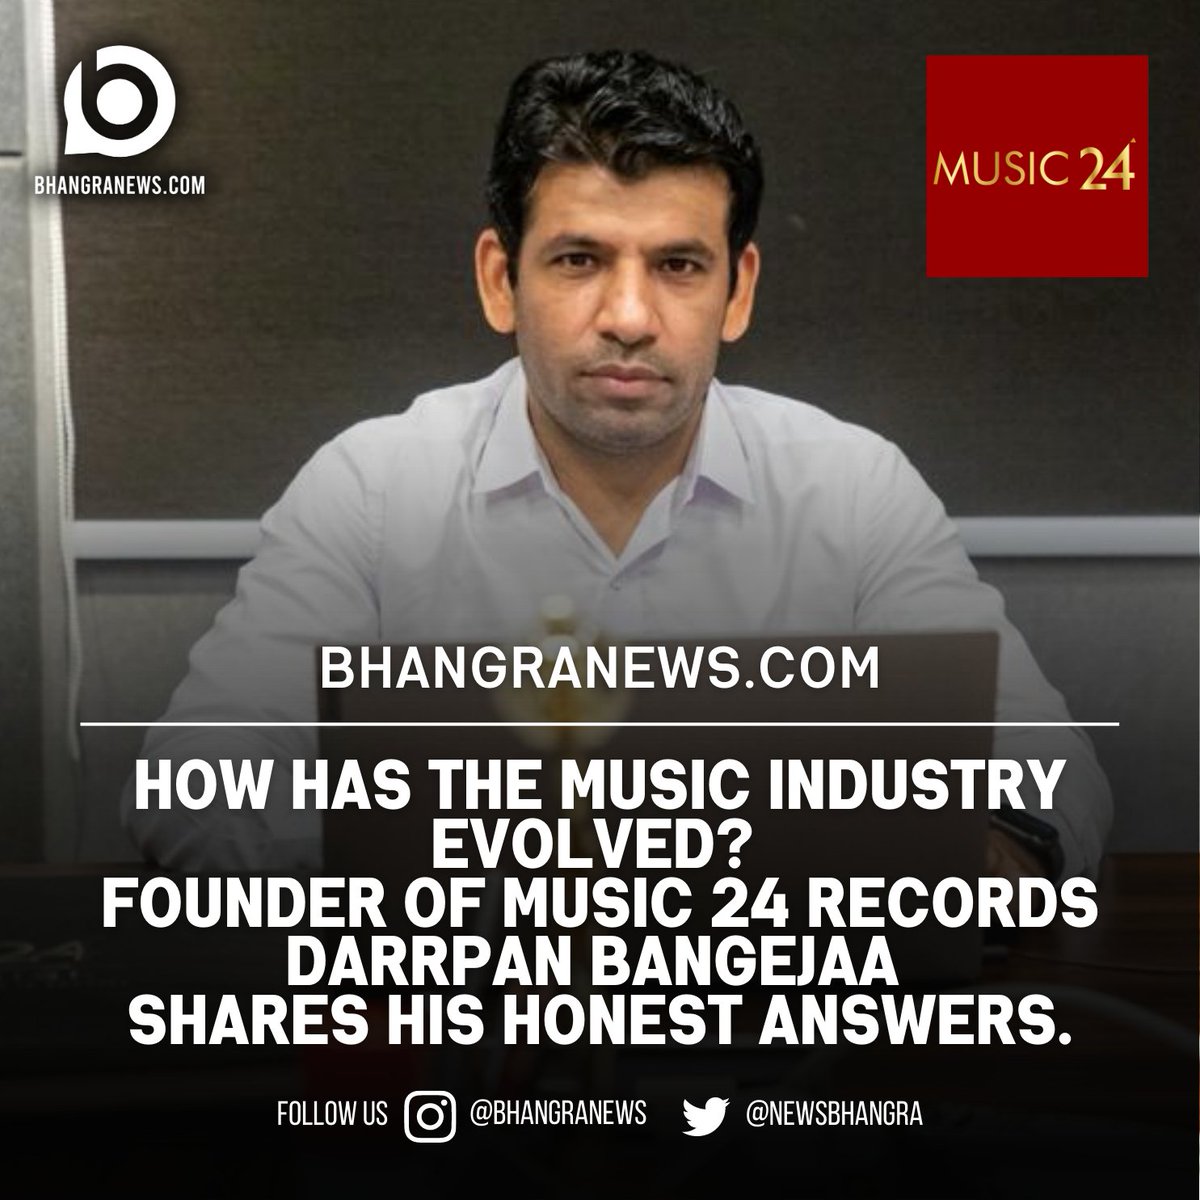 How has the music industry evolved? Producer and founder of Music 24 Records 'Darrpan Bangejaa's perspective. bhangranews.com/how-has-the-mu… #bhangranews #darrpanbangejaa #producer #music24records #musicindustry #musicbusiness #musicarticle